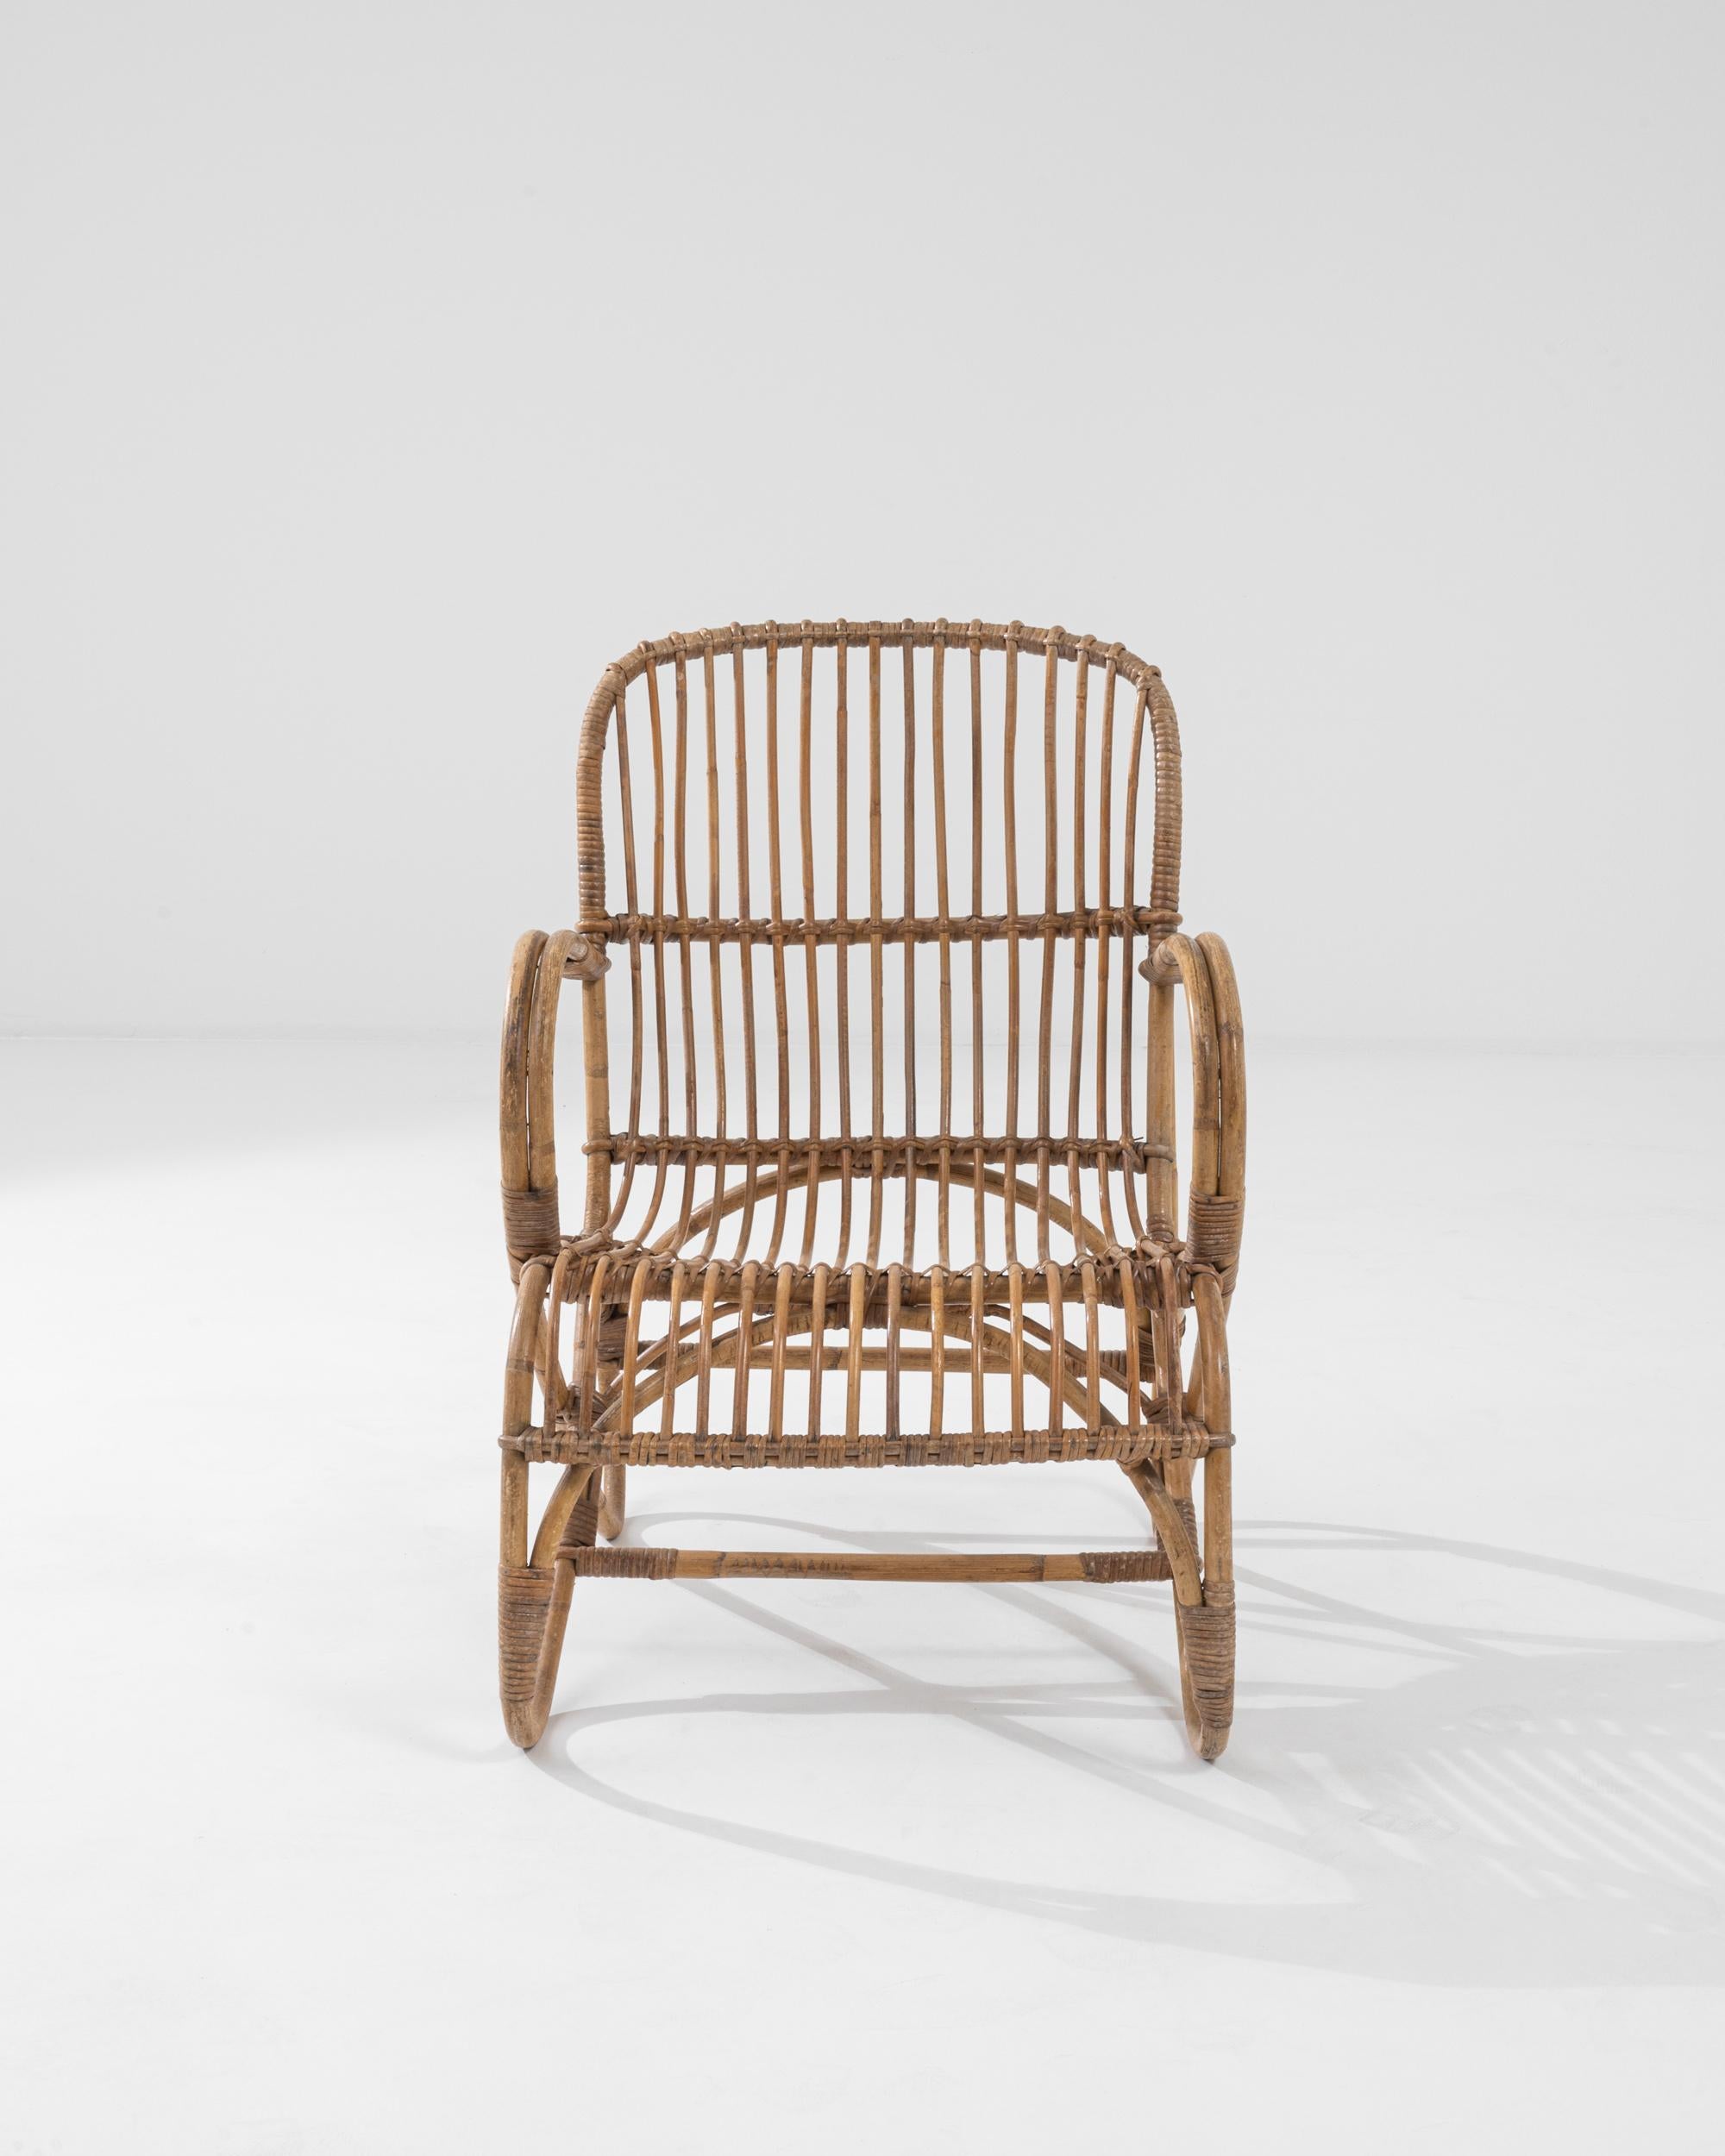 A wooden armchair from 1960 France. This french-made armchair is a playful twist on a mid-century classic. Using lashed together rattan, artisans have crafted a chair both geometrically pleasing and surprisingly comfortable. Created by looping